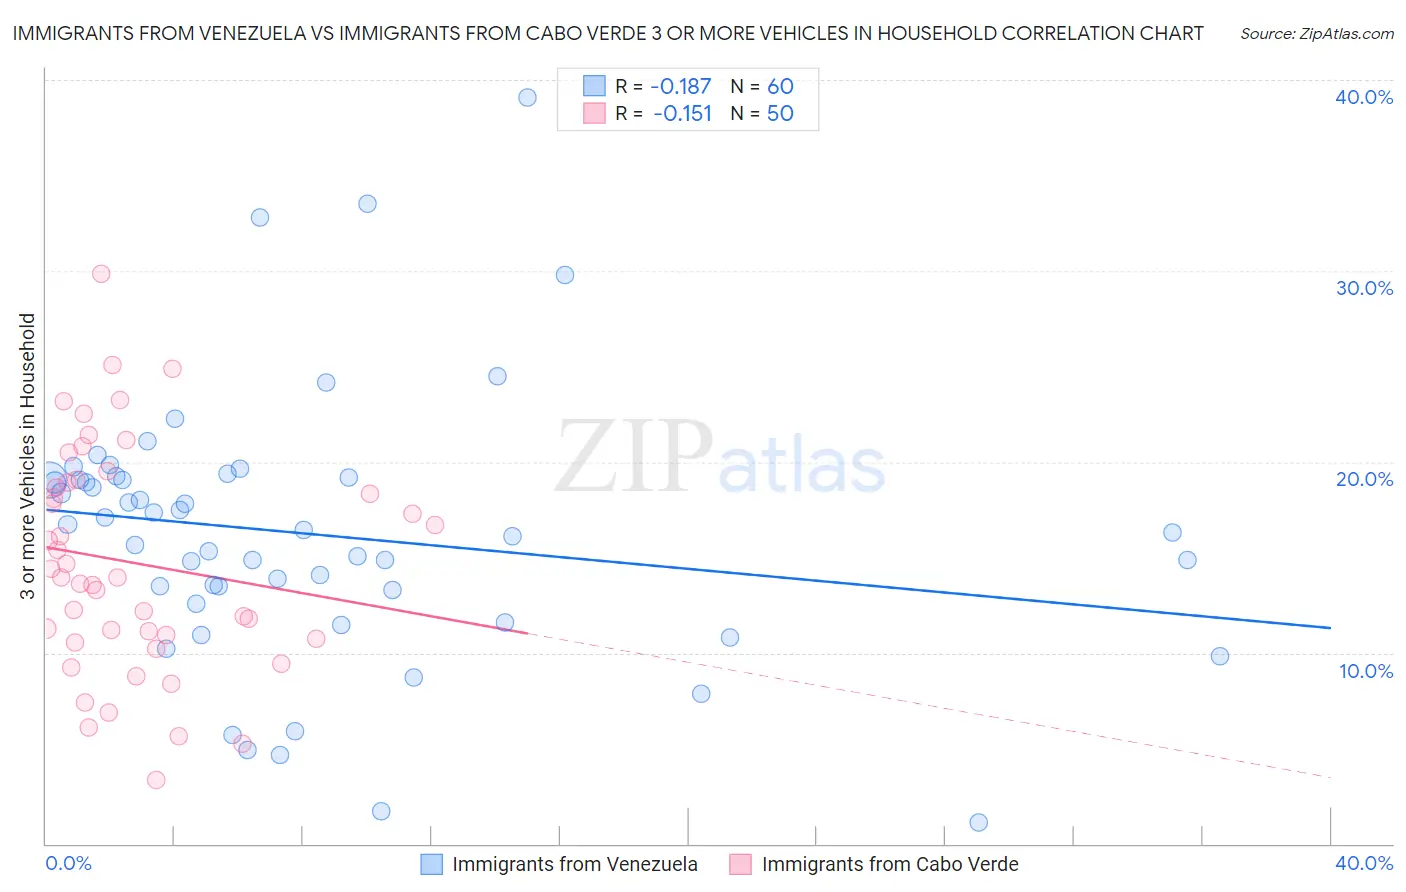 Immigrants from Venezuela vs Immigrants from Cabo Verde 3 or more Vehicles in Household